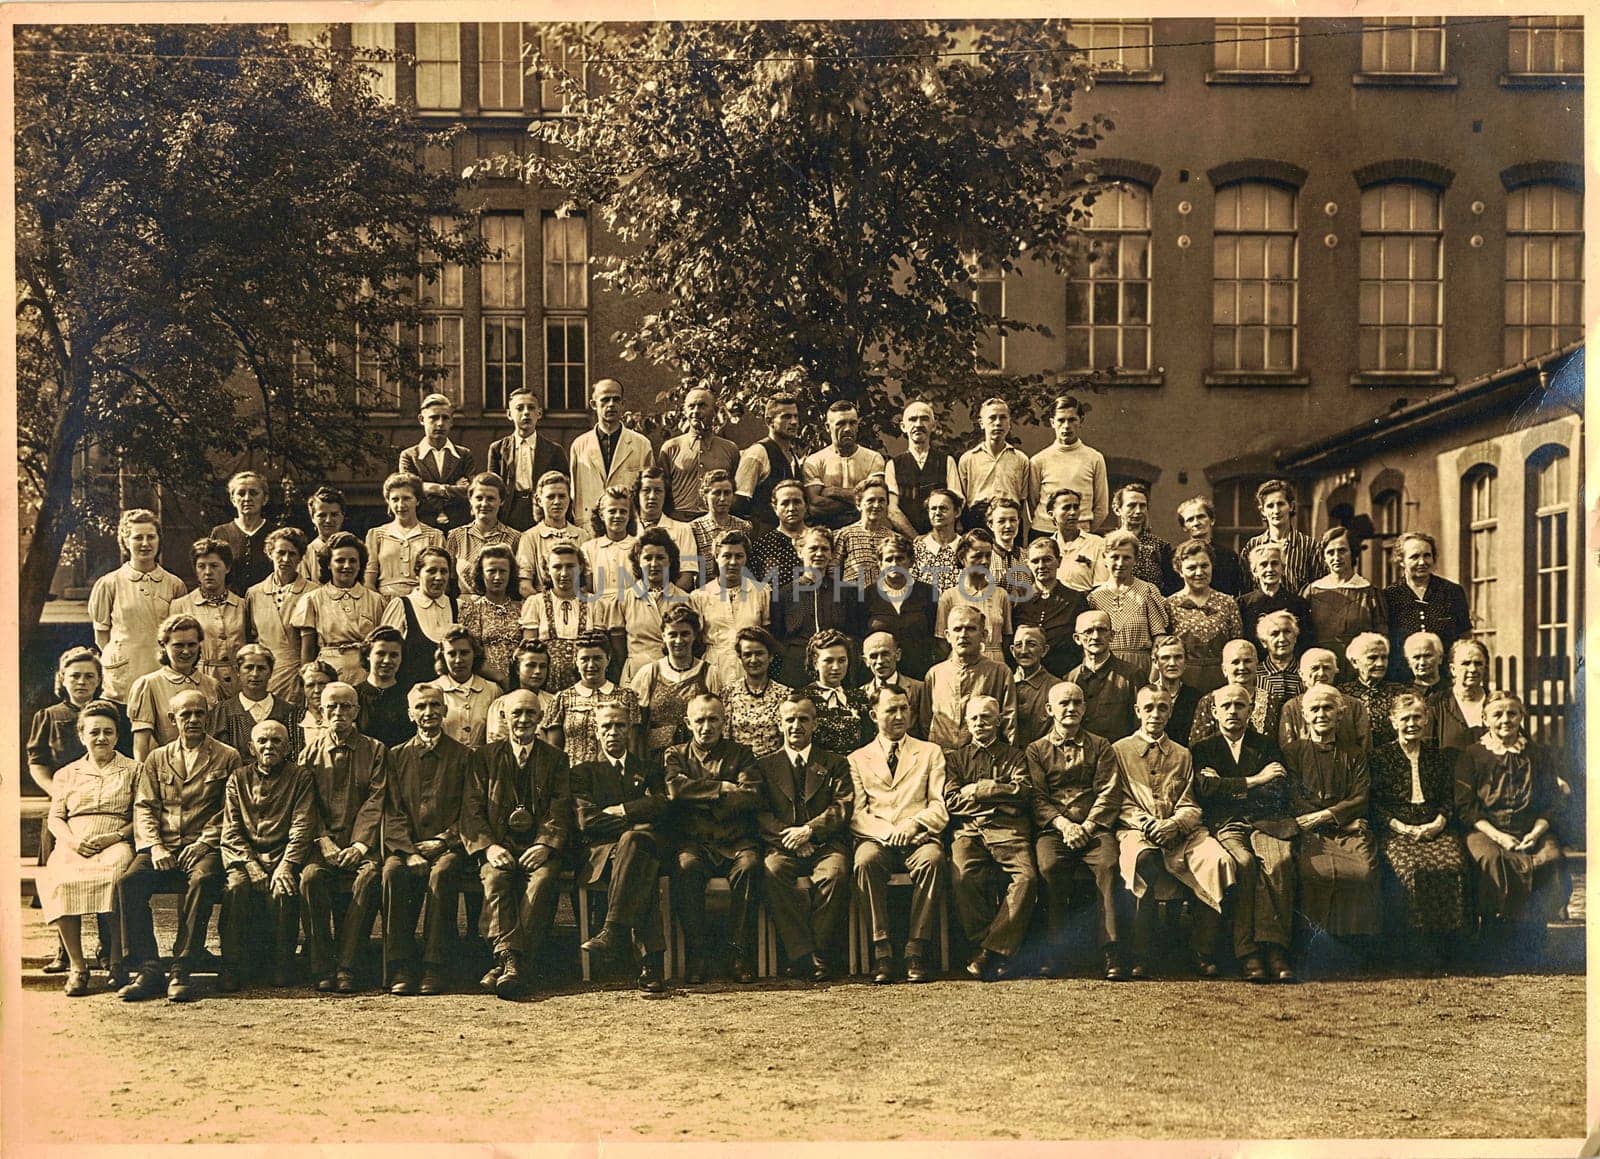 OBERLUNGWITZ, GERMANY - AUGUST 4, 1942: Retro photo shows people (employees of school) in front of building. Vintage black white photography.